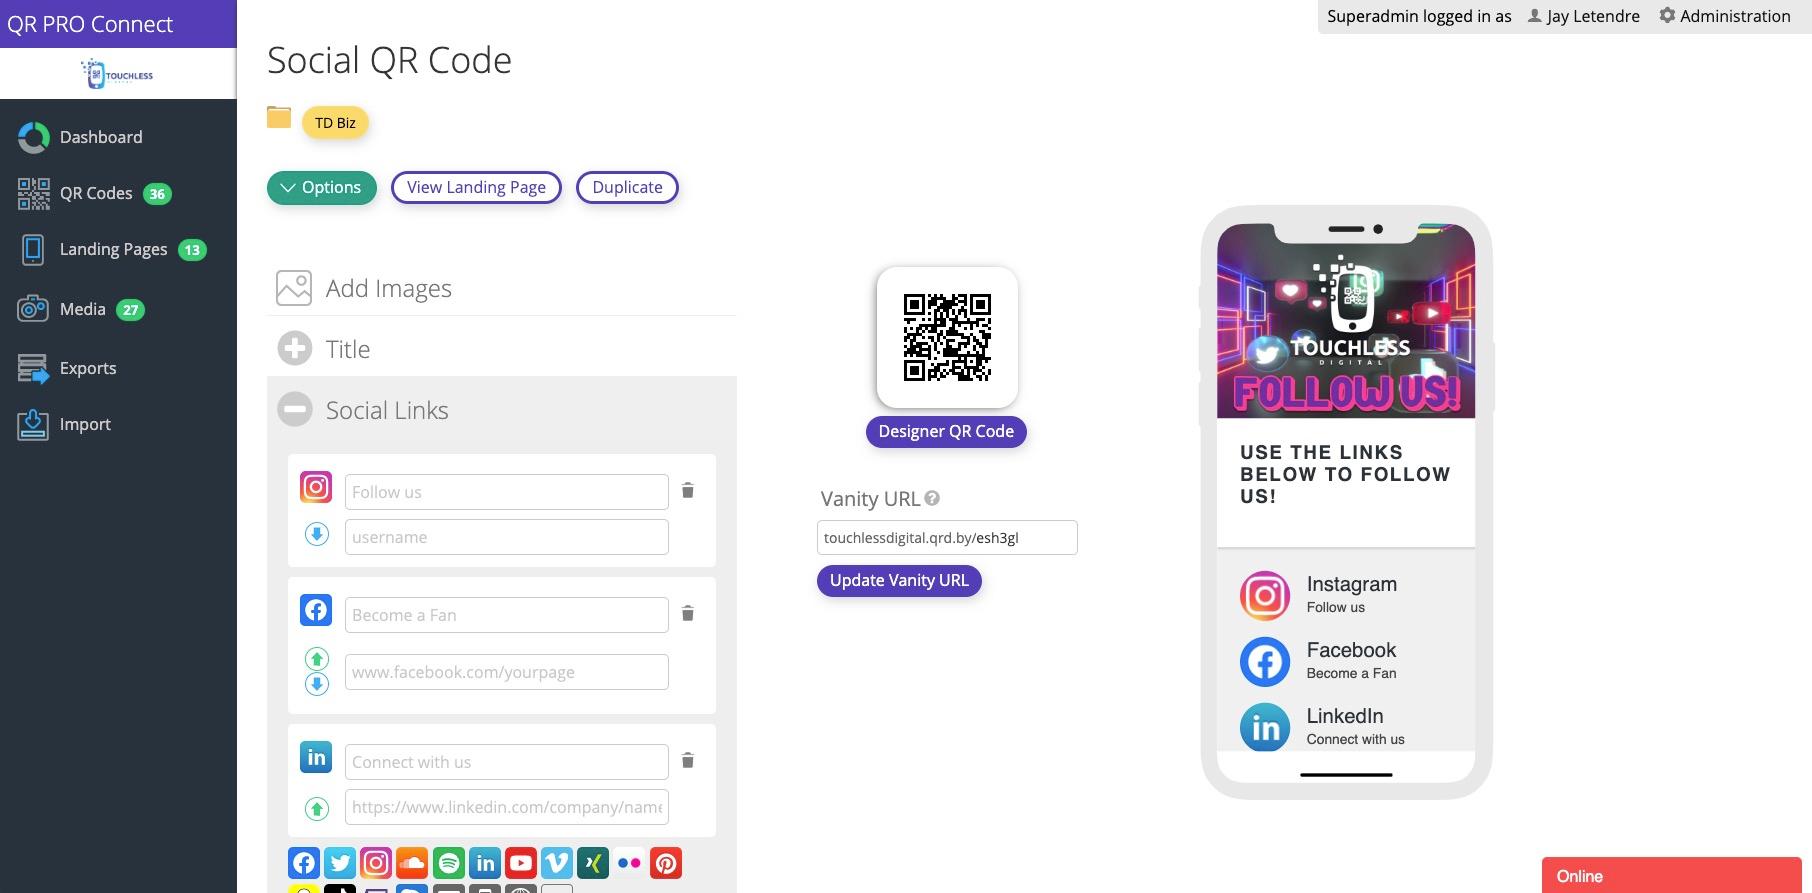 QR PRO Connect - Create mobile optimized branded landing pages that are linked to QR codes. Add CTA's (call to action) buttons for lead generation and linked to media. Consolidate all your social media accounts on one page.